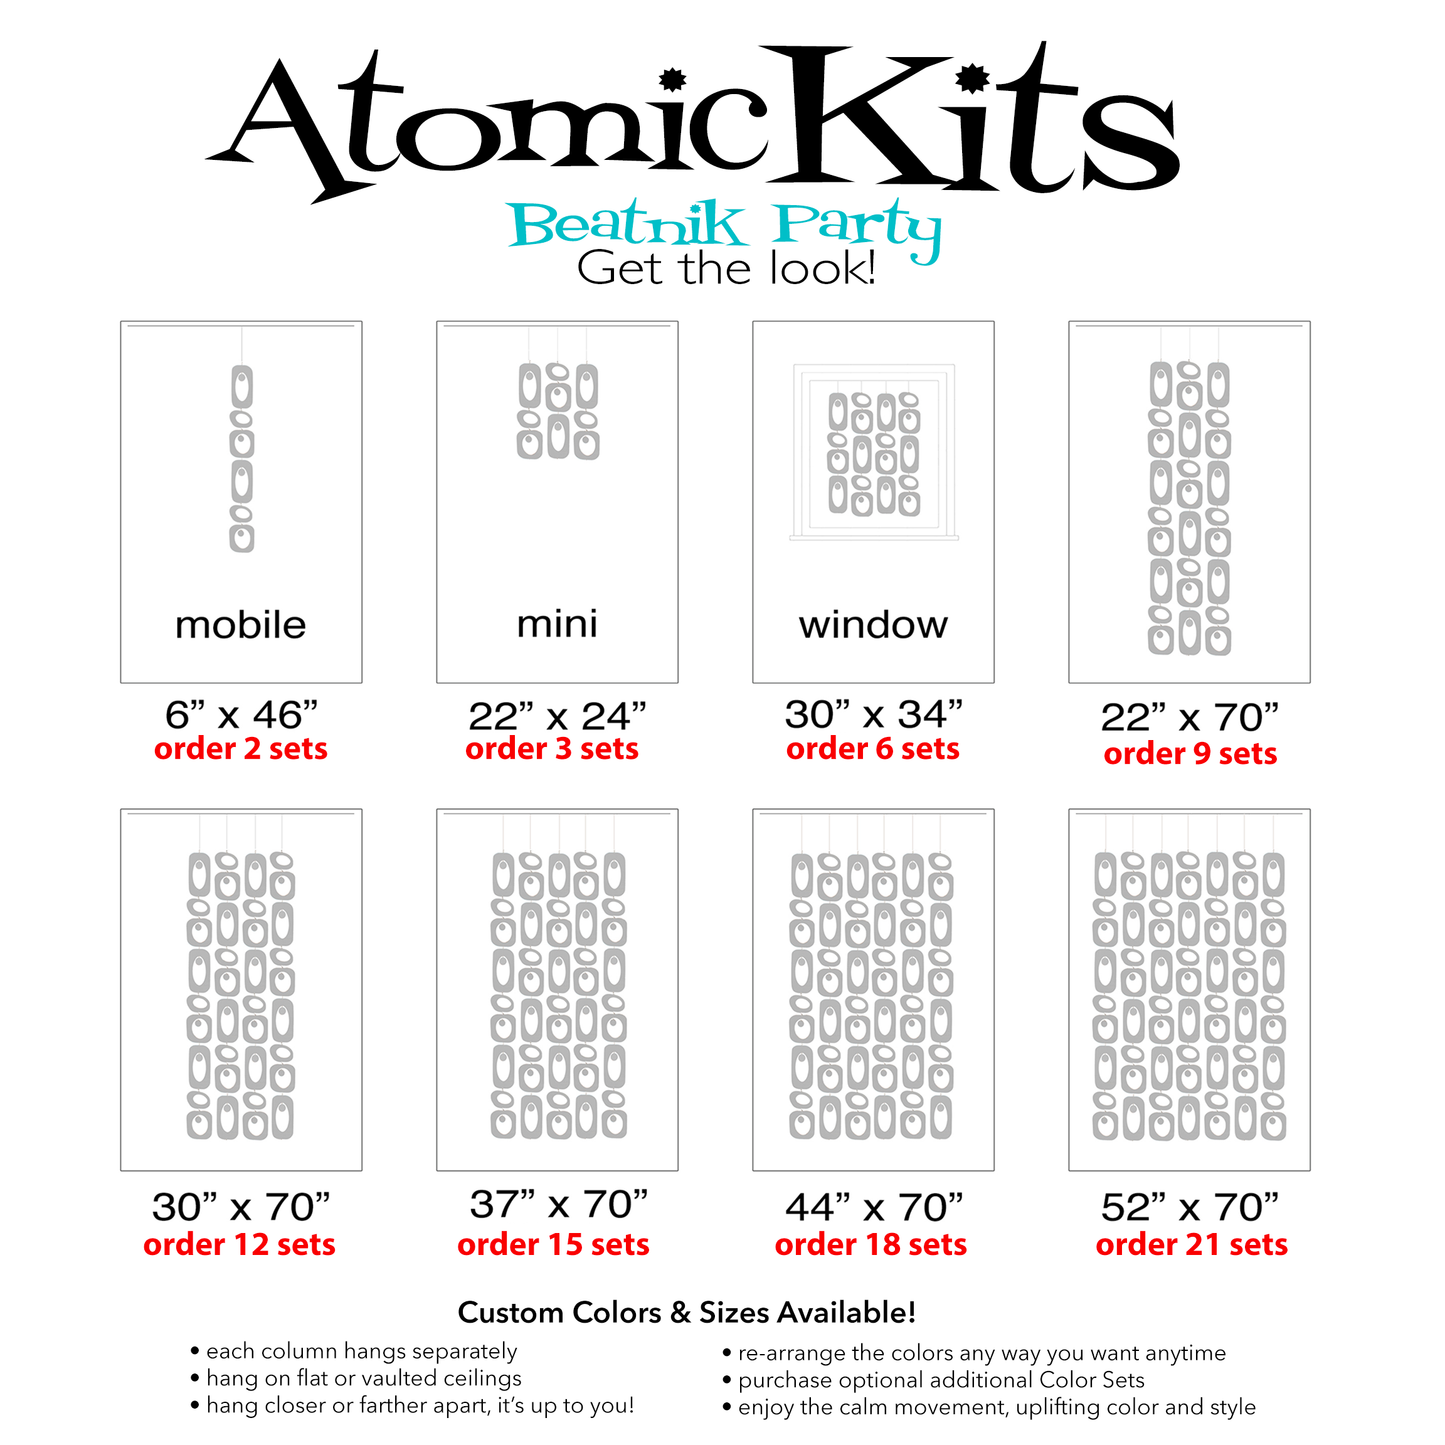 Atomic Kits Beatnik Party Size Chart to make mid century modern retro room dividers, art mobiles, and curtains by AtomicMobiles.com